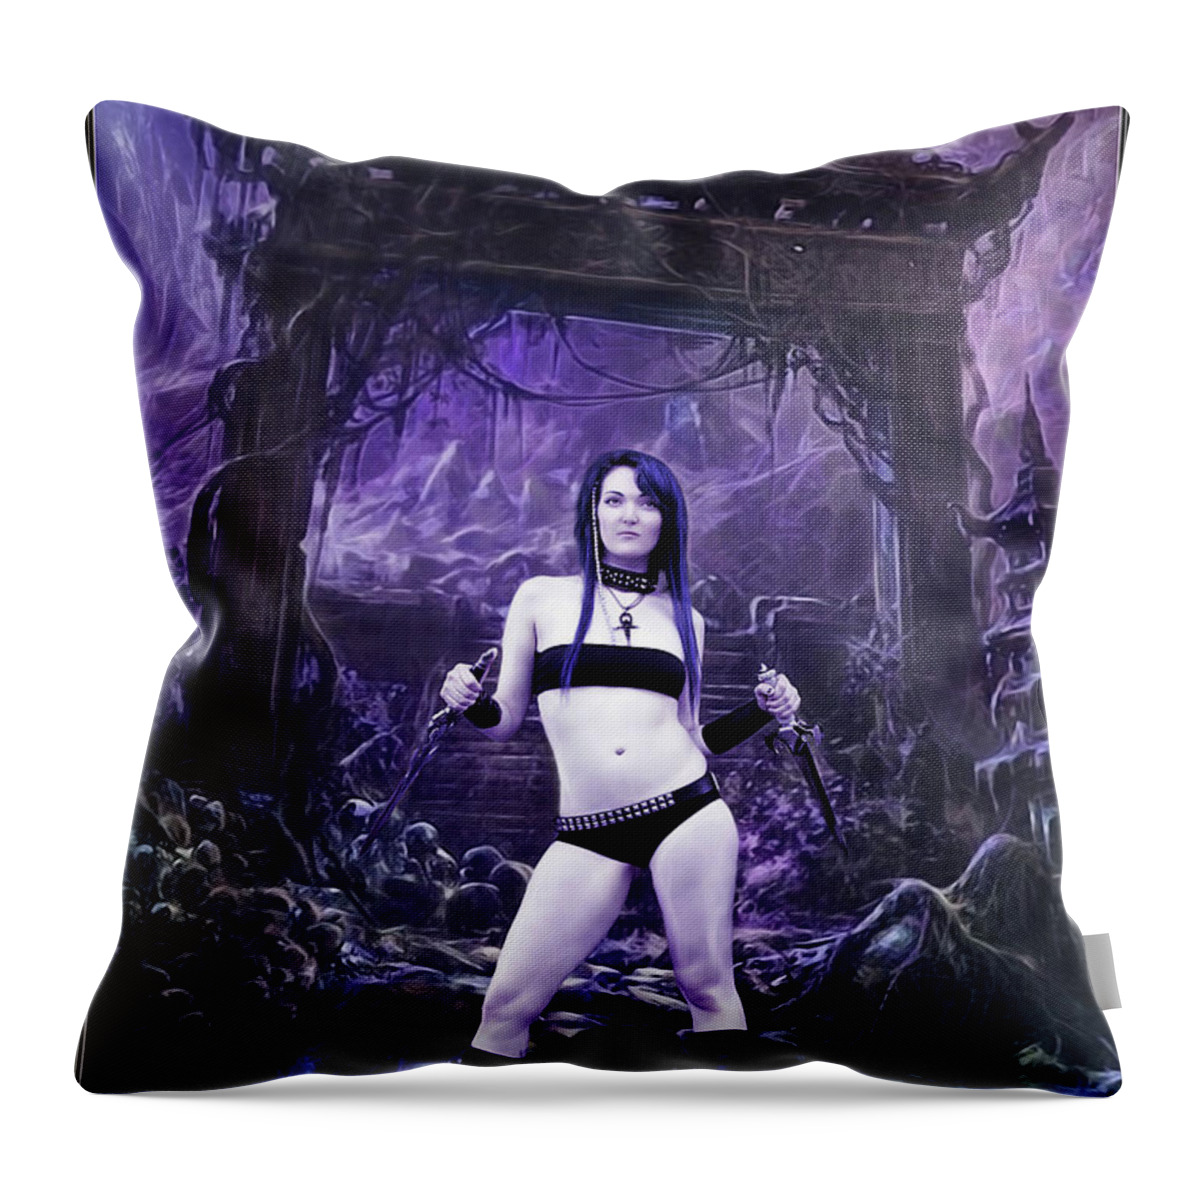 Fantasy Throw Pillow featuring the photograph Amazon In The Mystic Ruins by Jon Volden